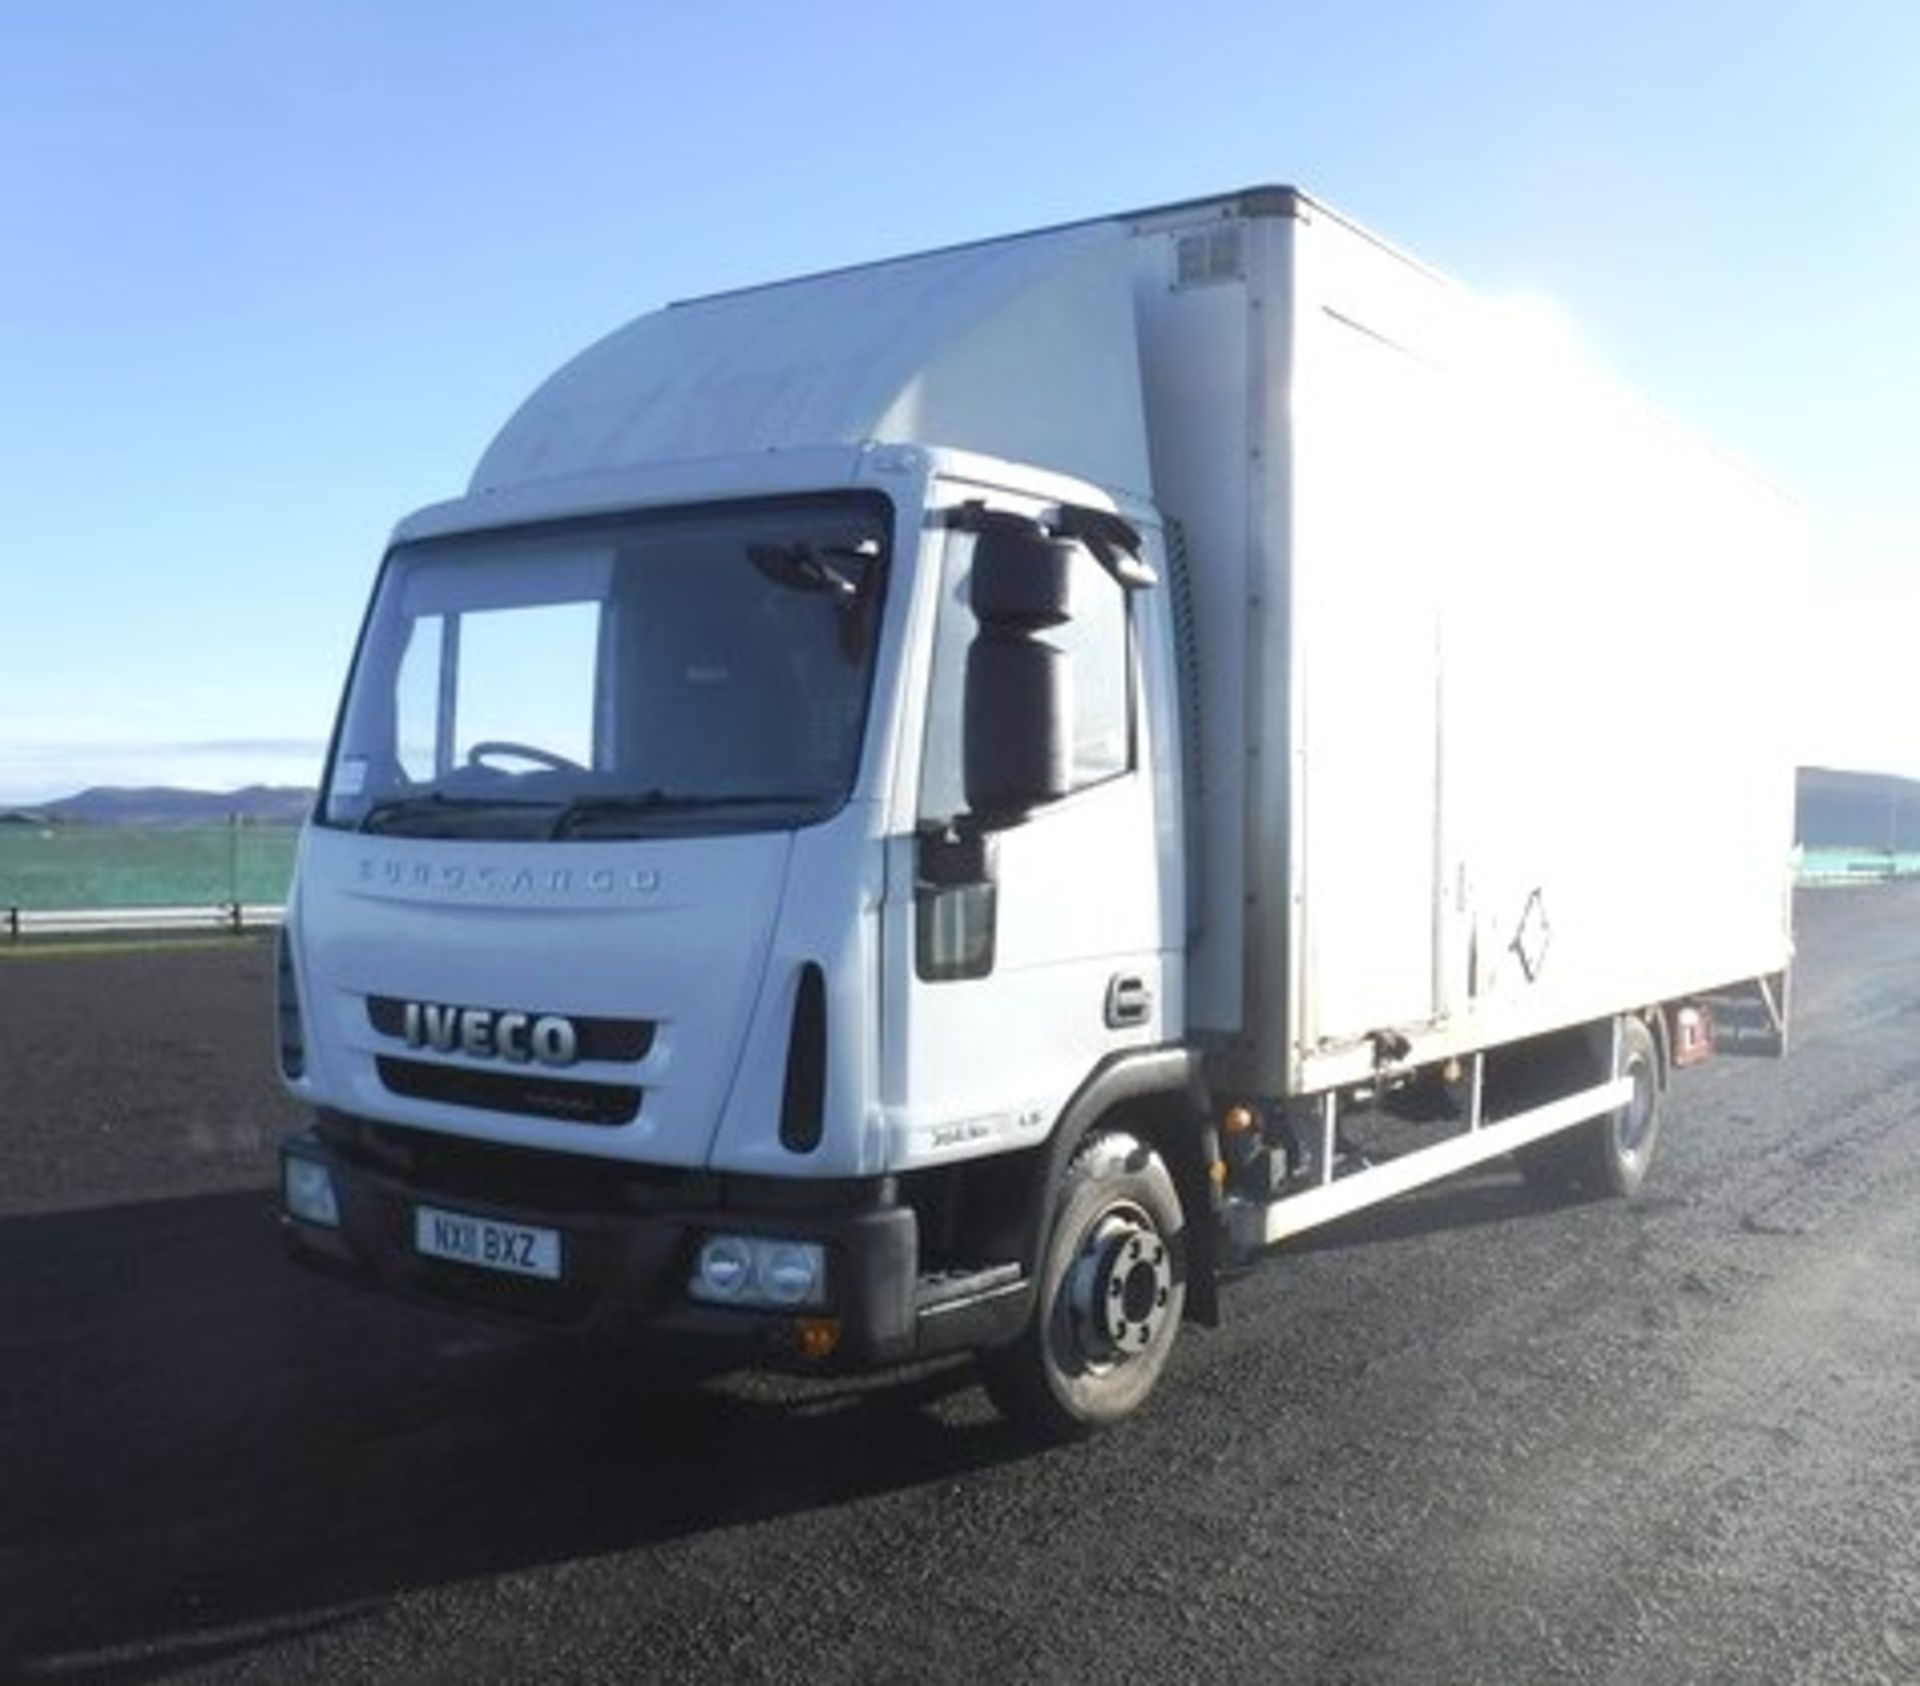 IVECO MODEL EUROCARGO (MY 2008) - 3920cc - Image 2 of 24